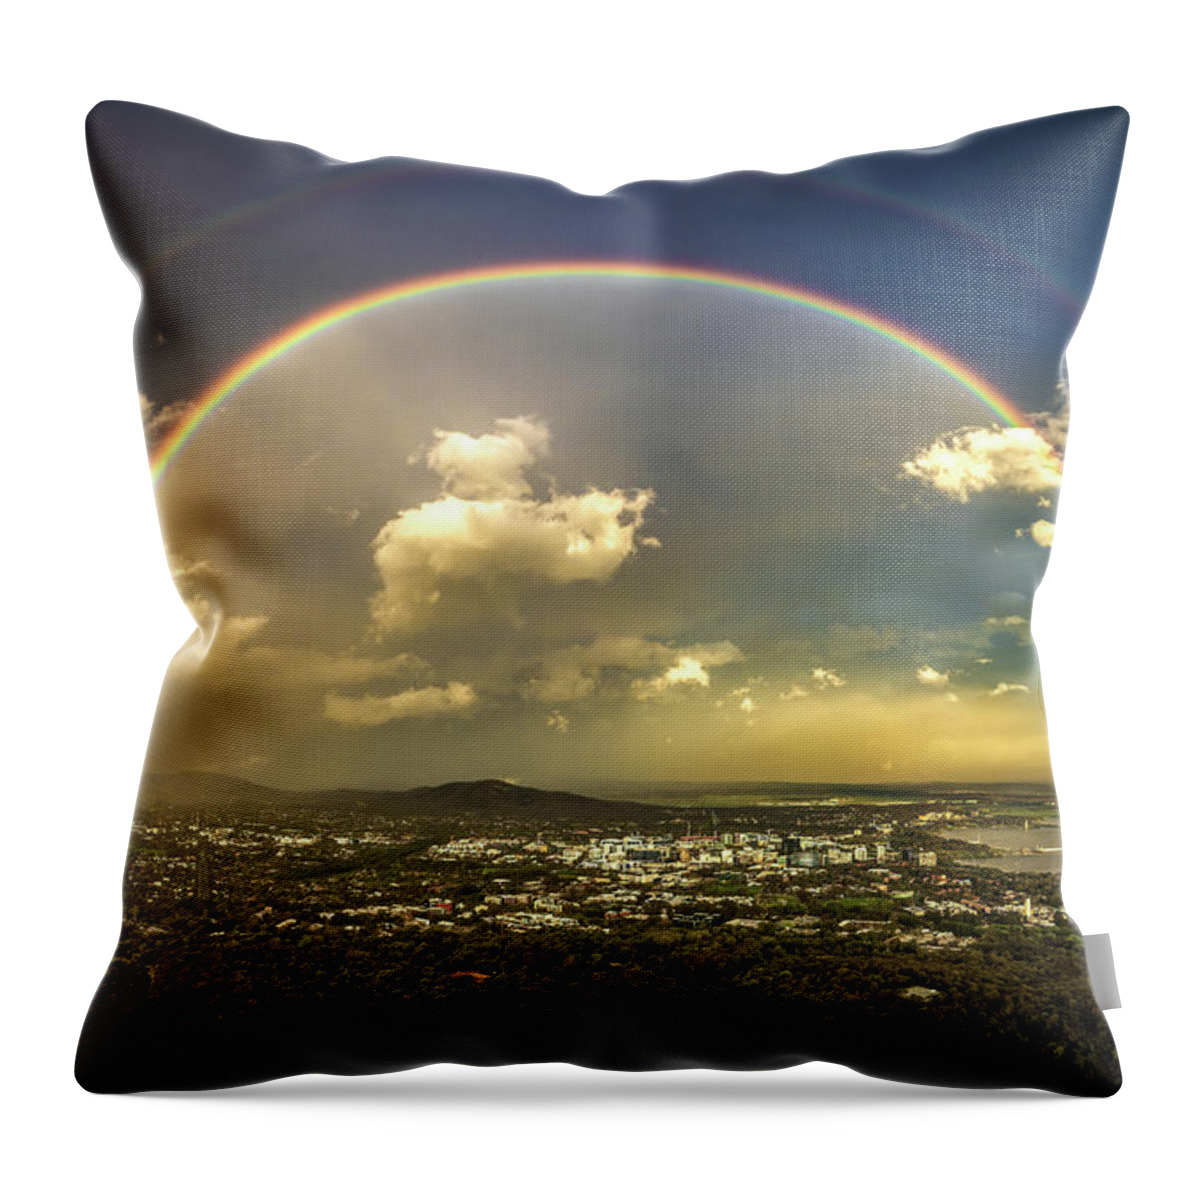 Double Rainbow Throw Pillow featuring the photograph The Dome by Ari Rex